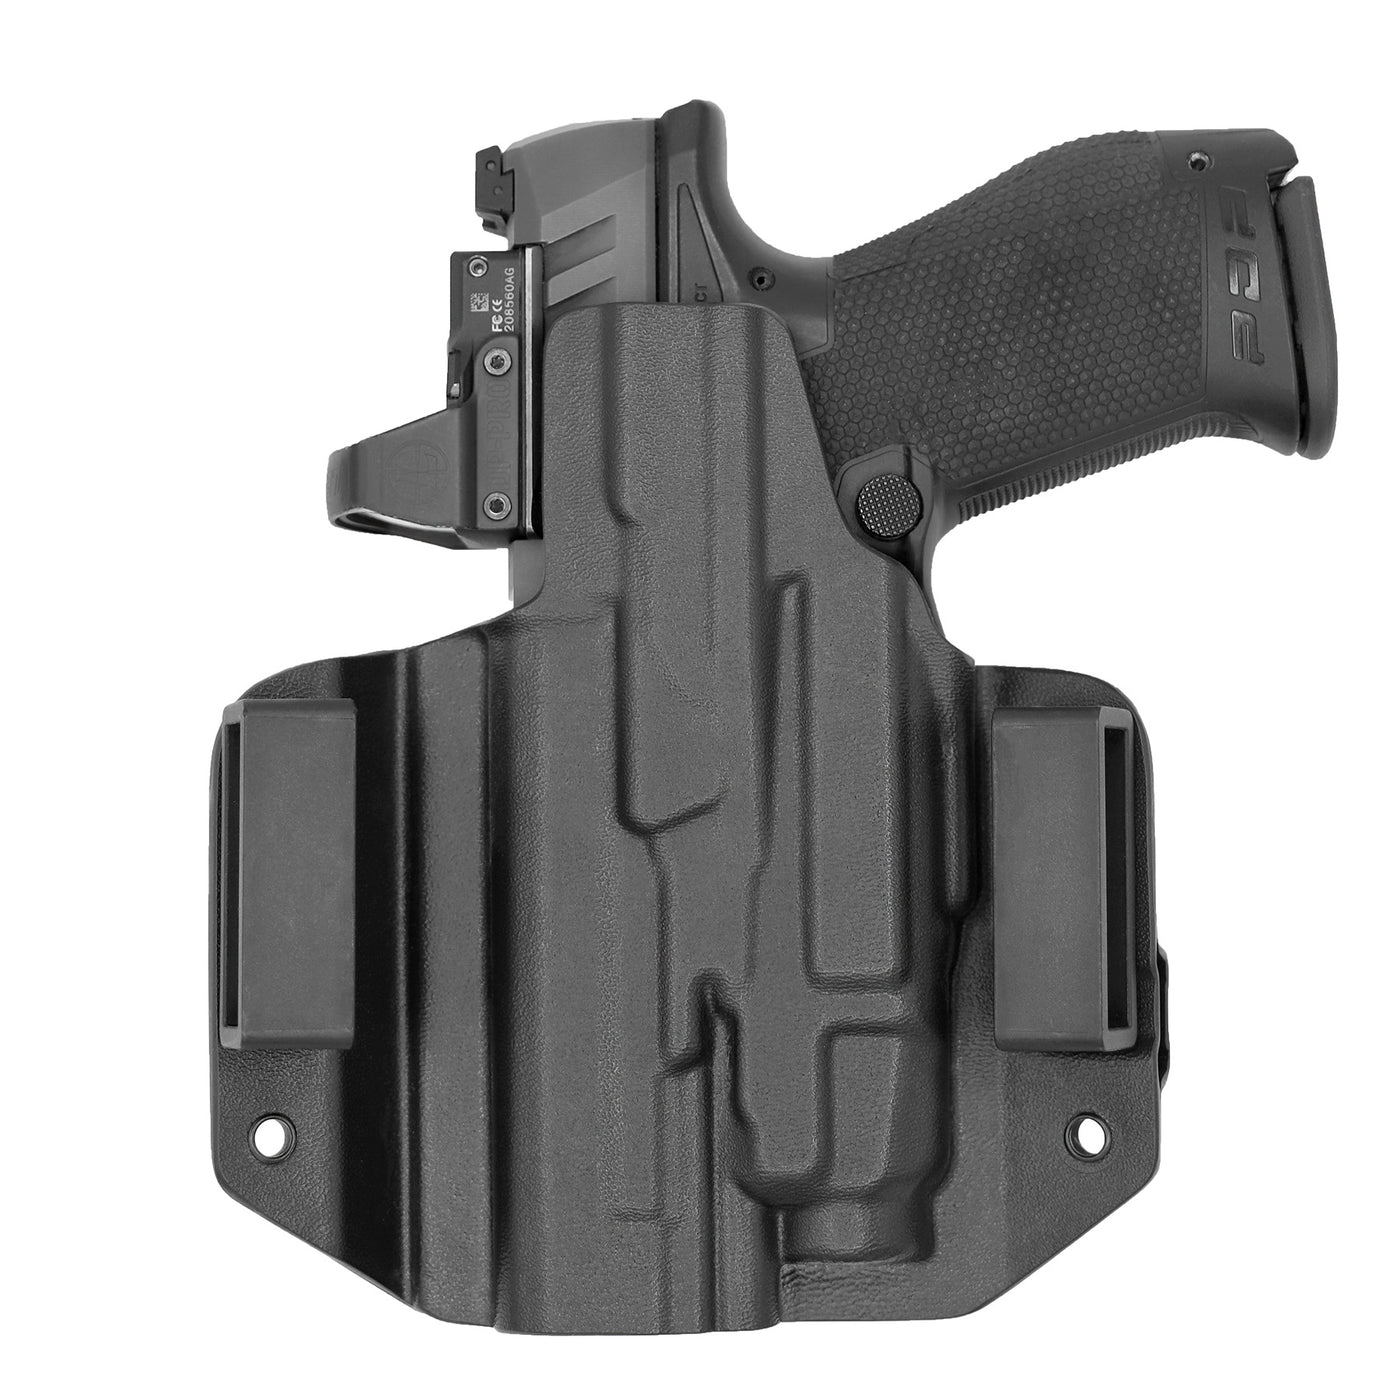 C&G Holsters custom OWB Tactical Beretta M9A3 Streamlight TLR7/A in holstered position back view